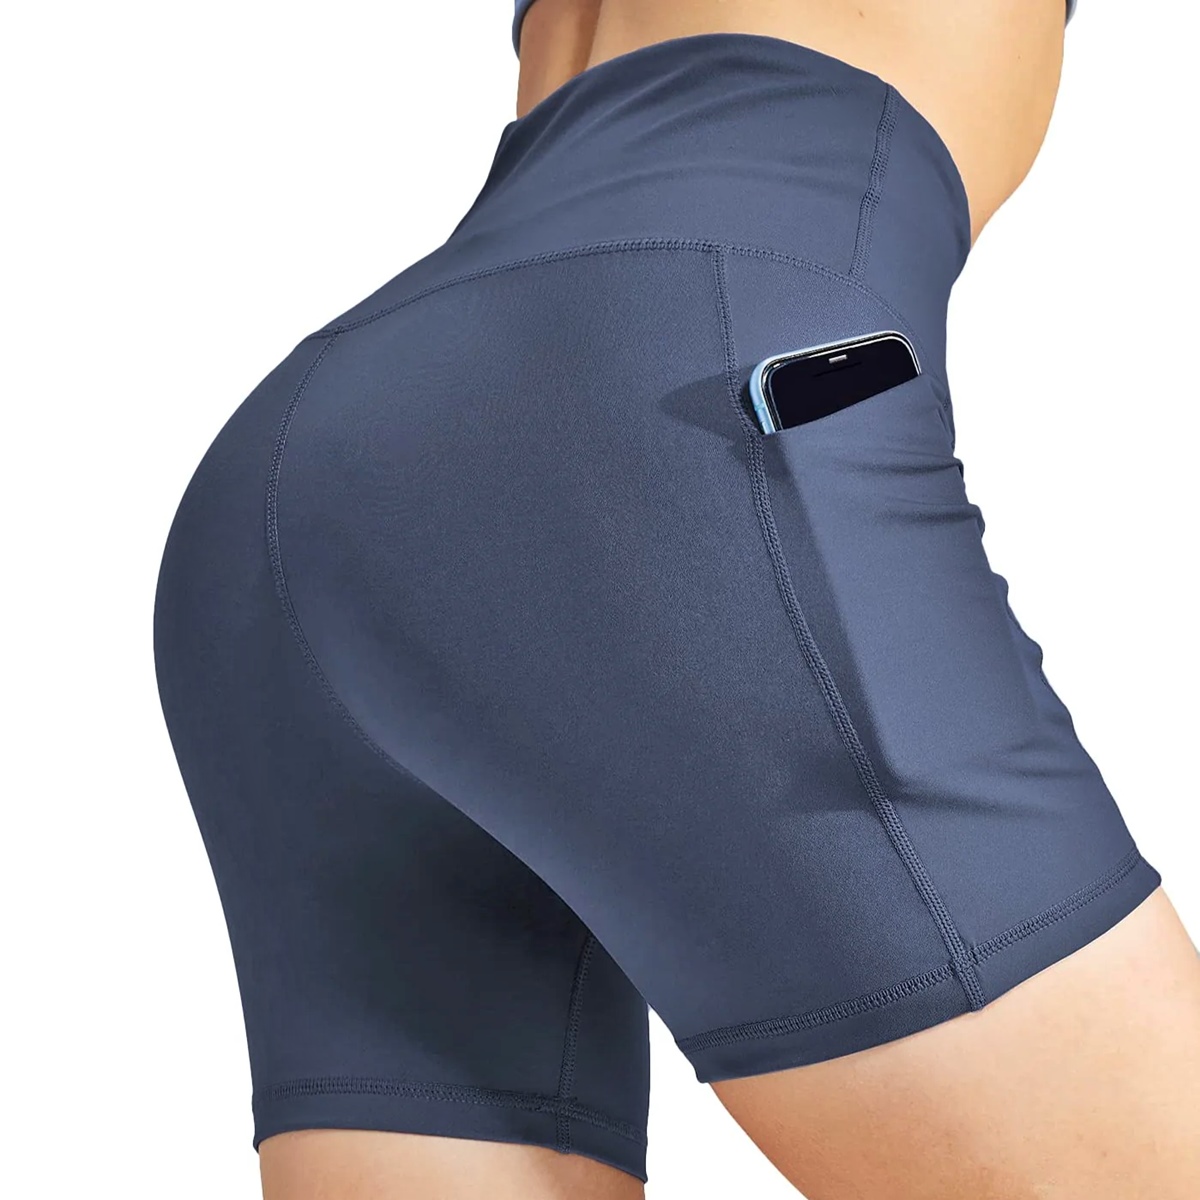 11 Best Women’s Compression Shorts For 2023